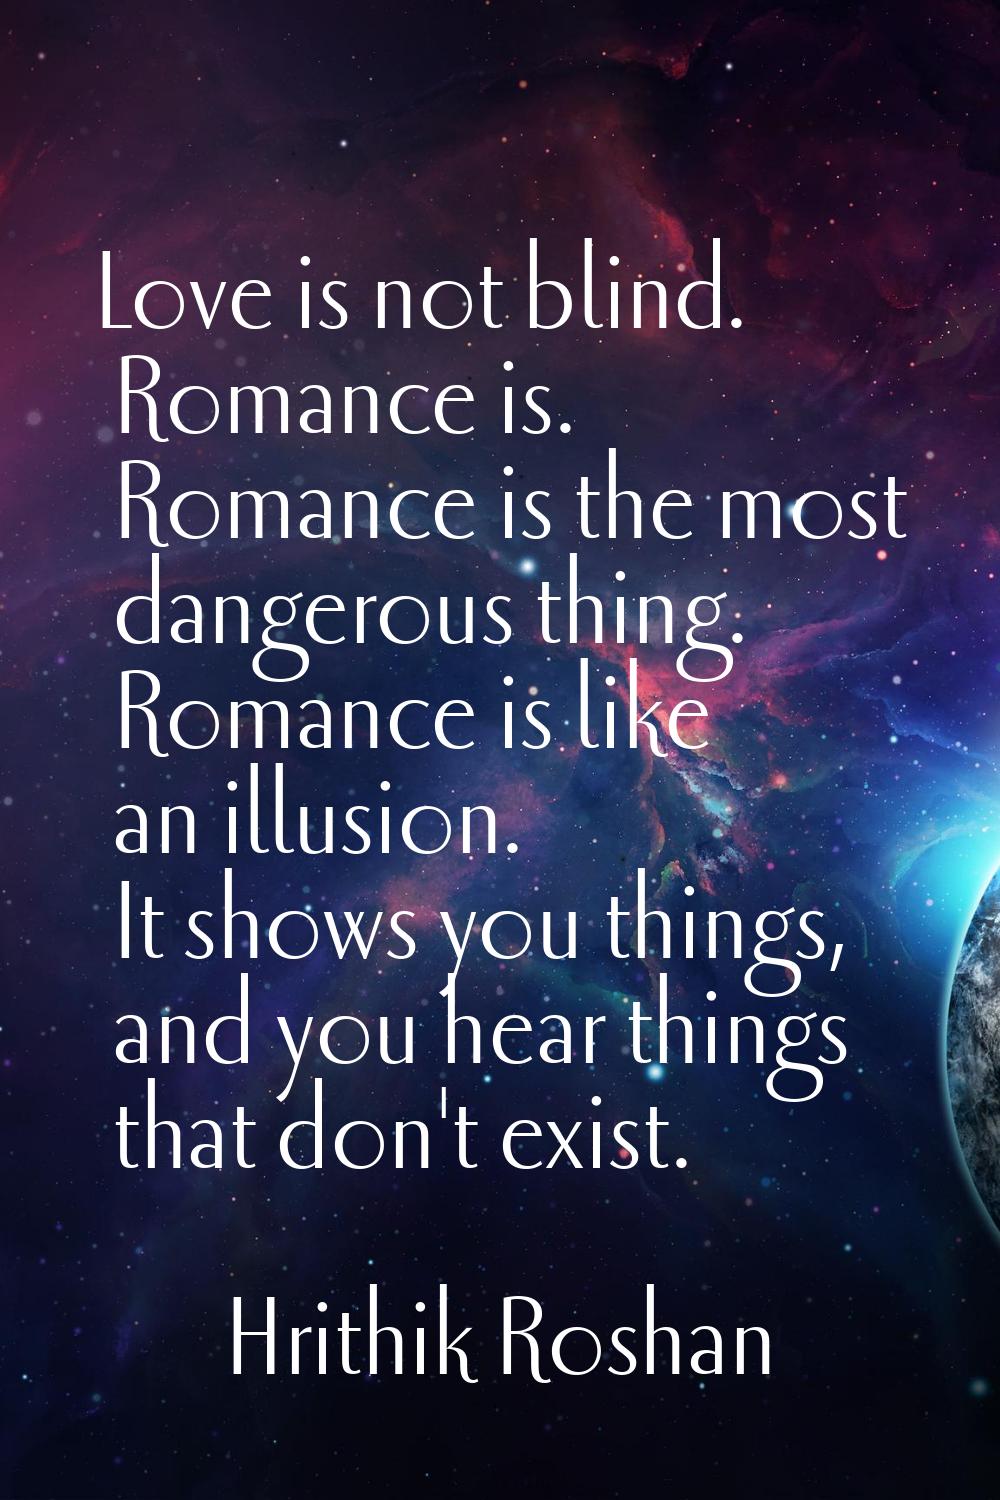 Love is not blind. Romance is. Romance is the most dangerous thing. Romance is like an illusion. It